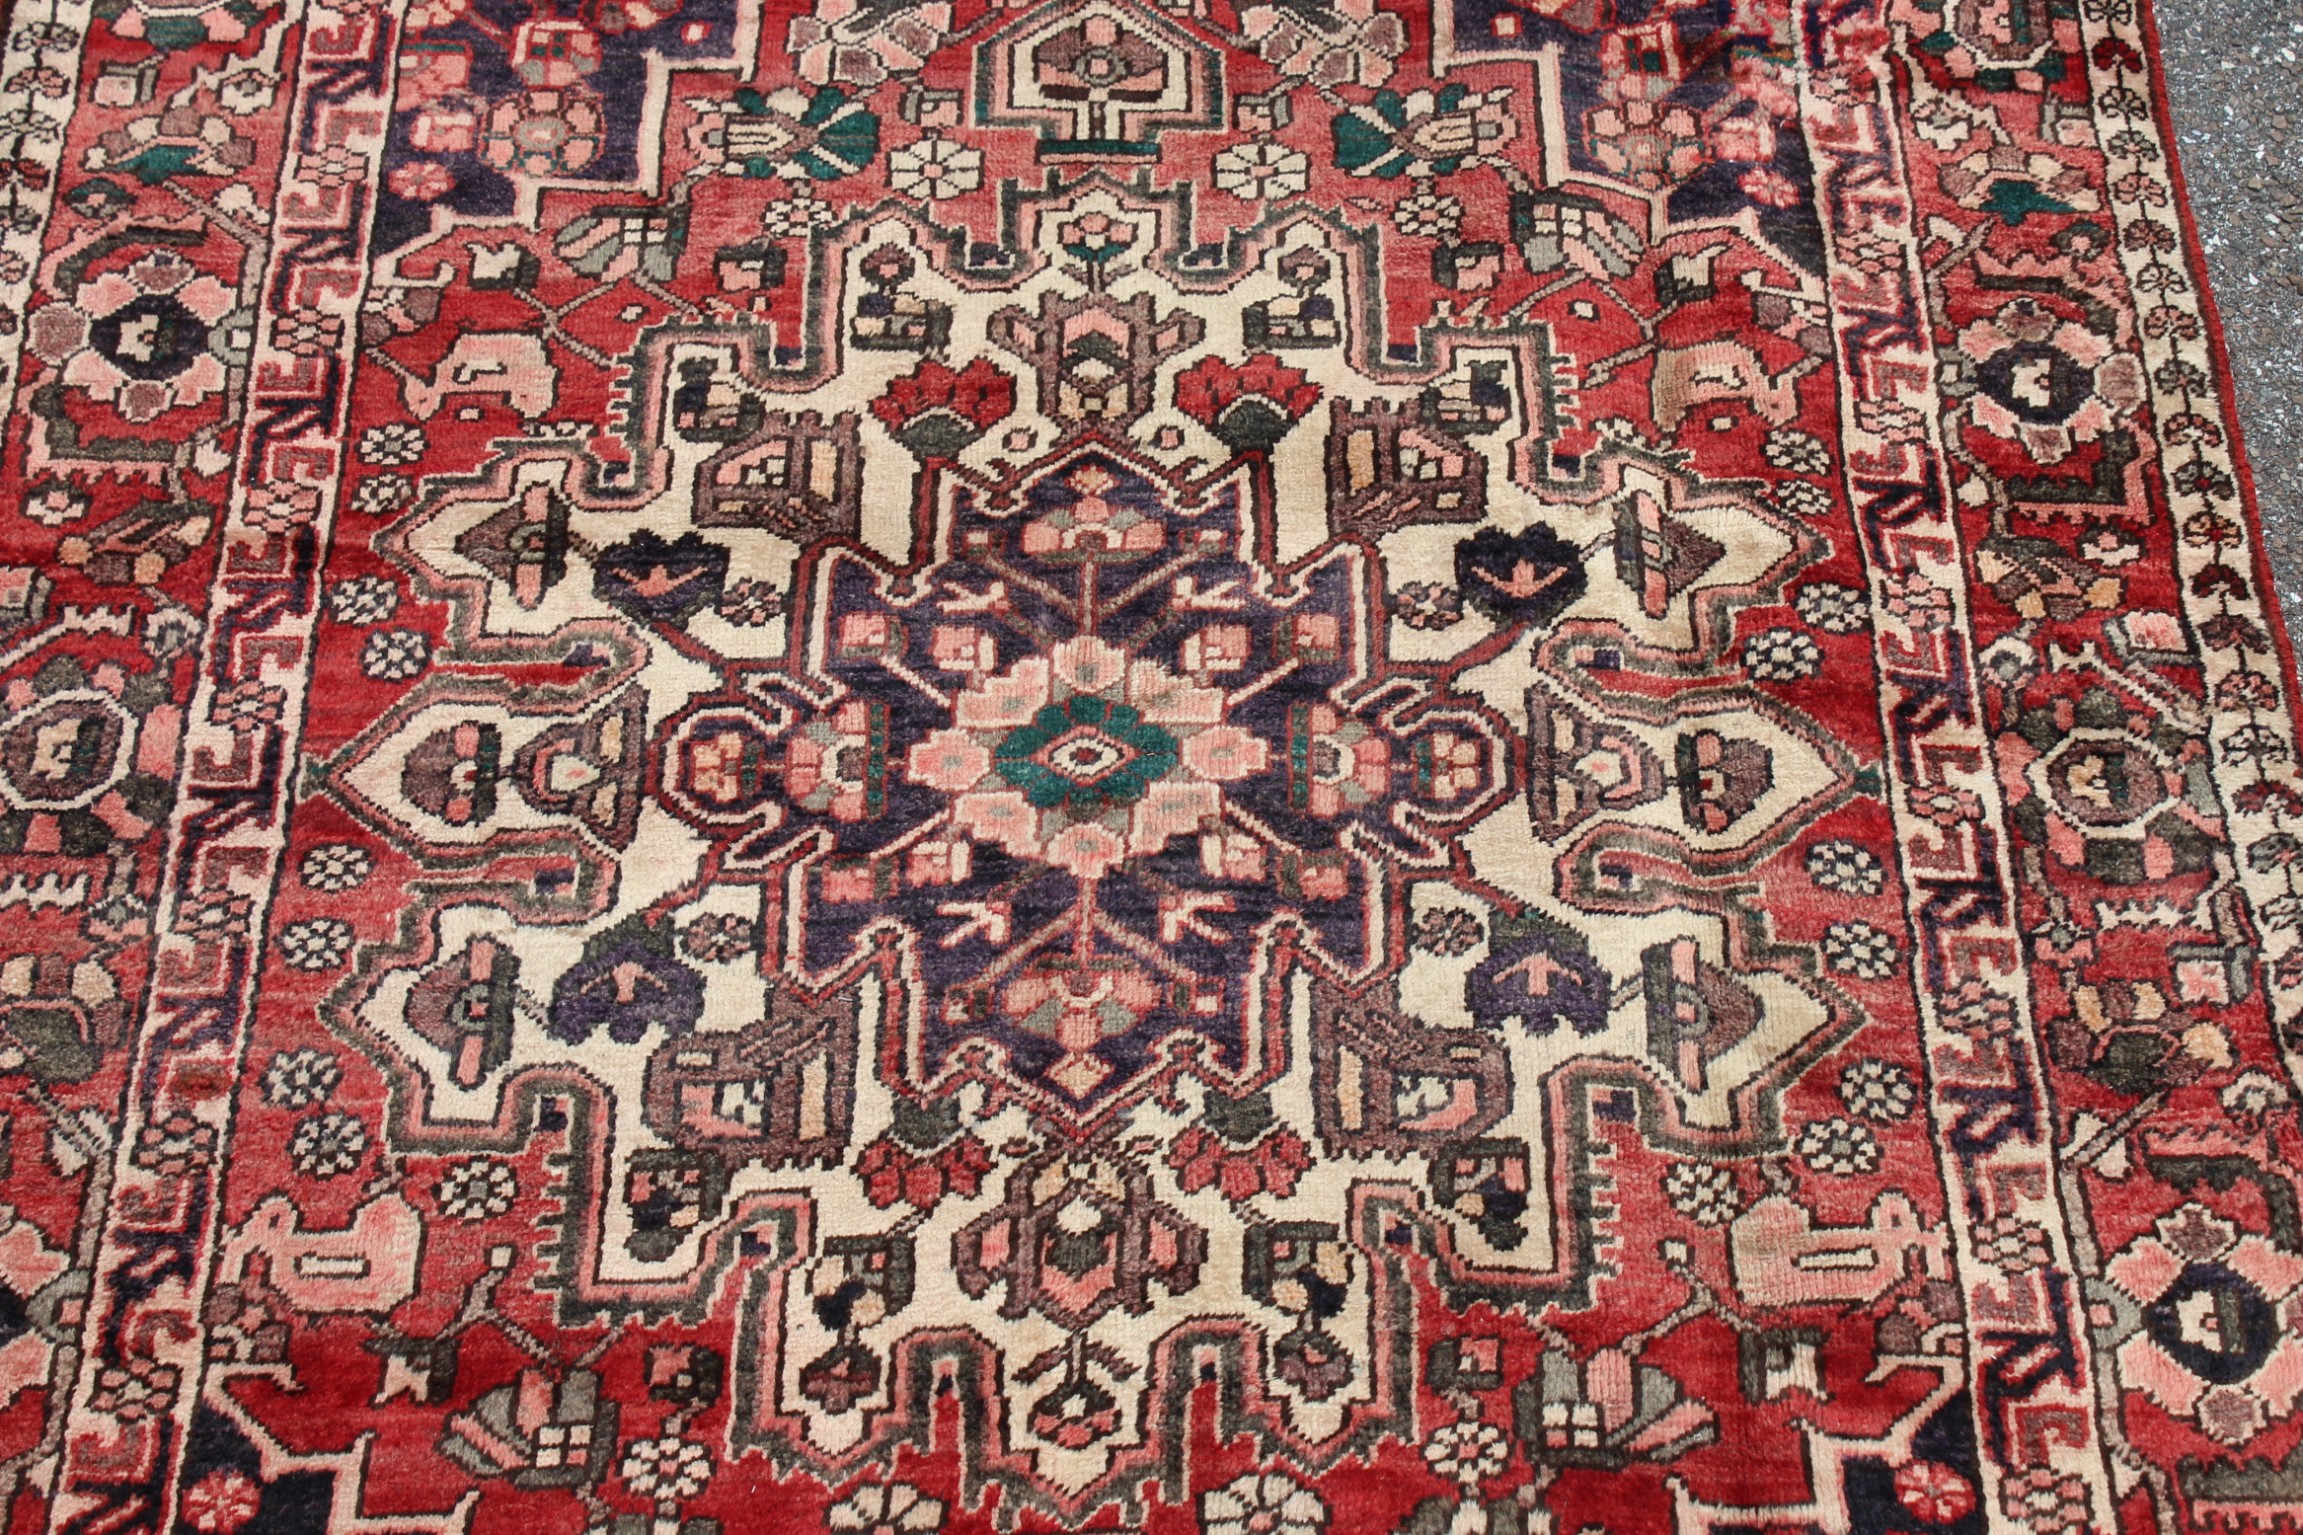 Heriz Hand-Knotted Persian Wool Rug - 5'5" x 8' - Image 6 of 12